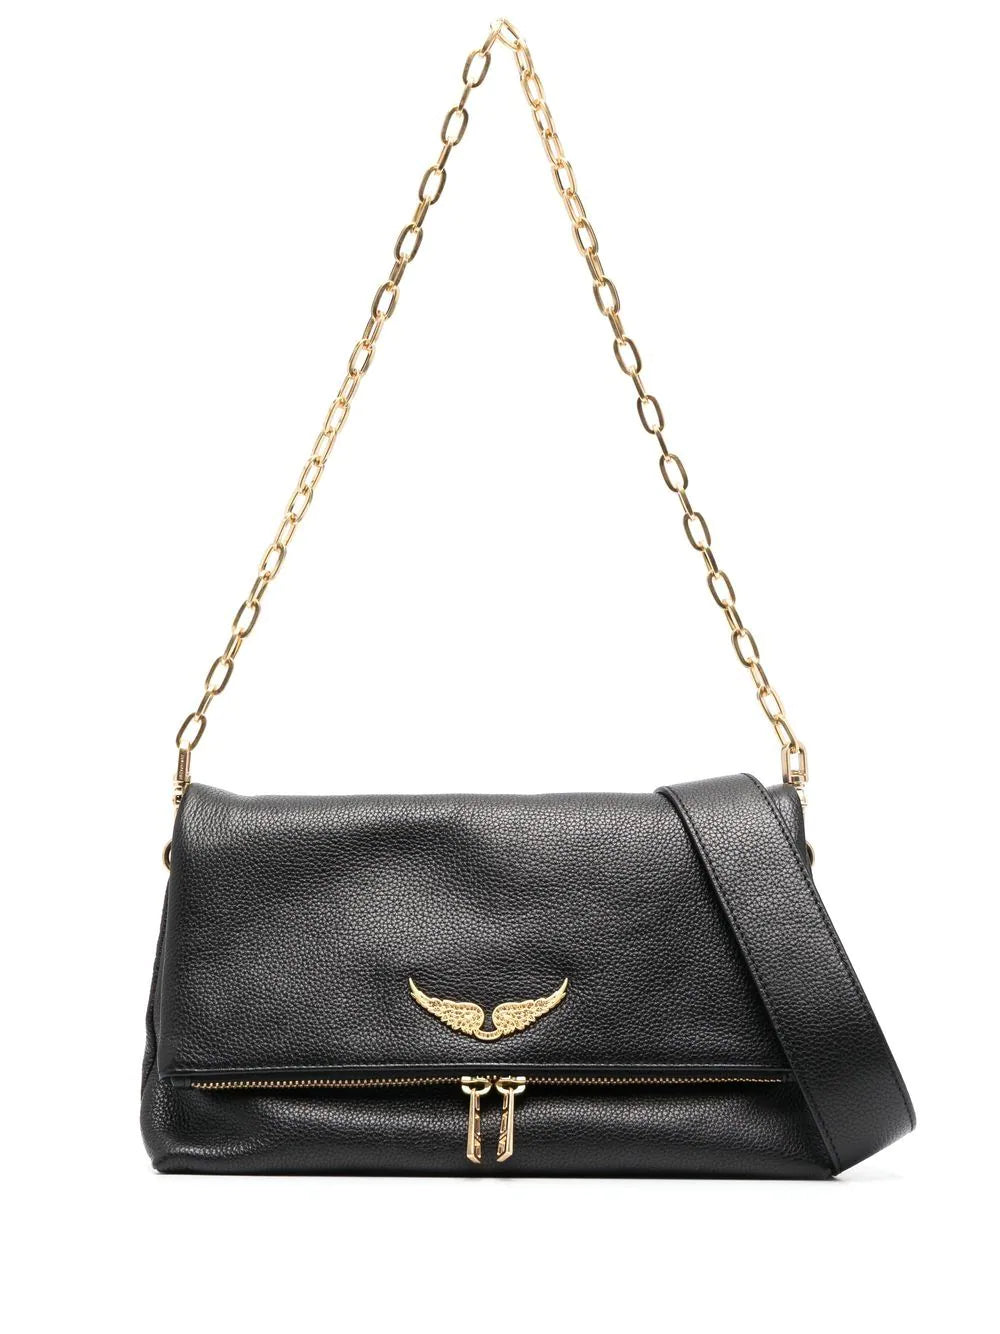 ROCKY GRAINED LEATHER bag, black-gold